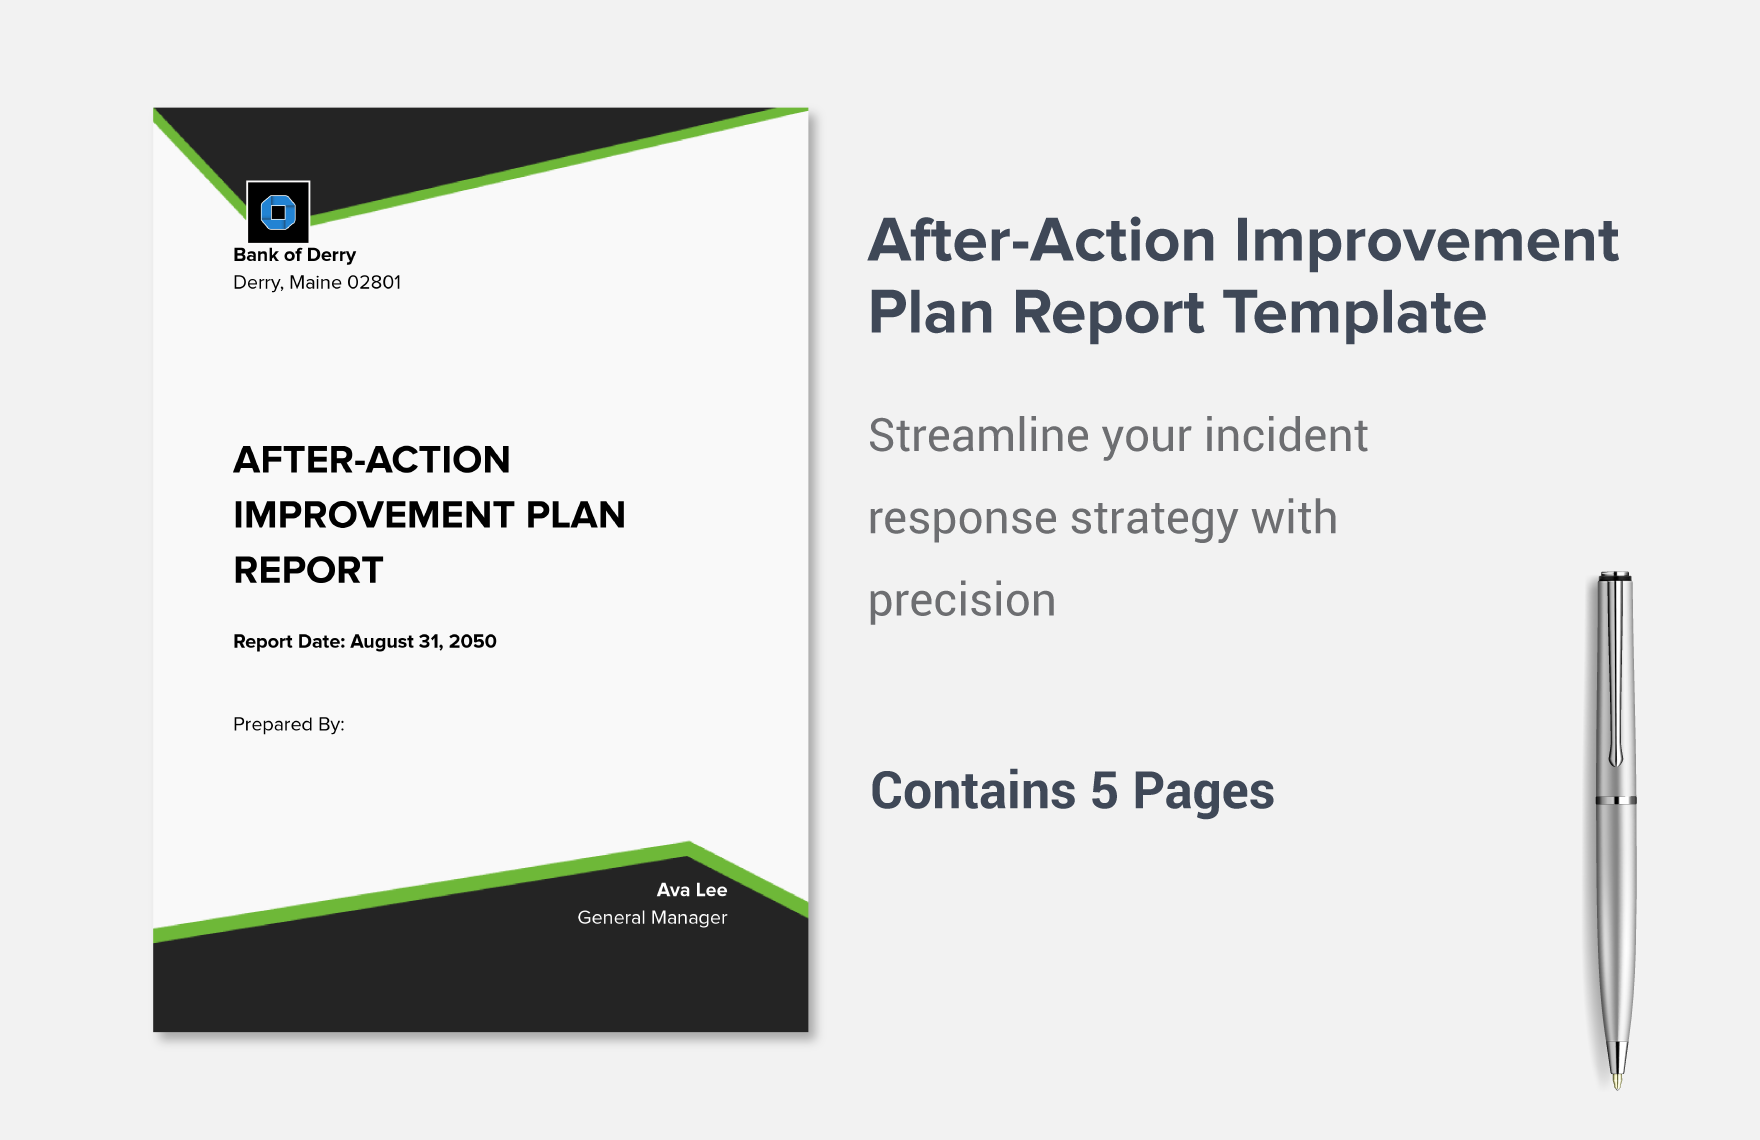 After-Action Improvement Plan Report Template